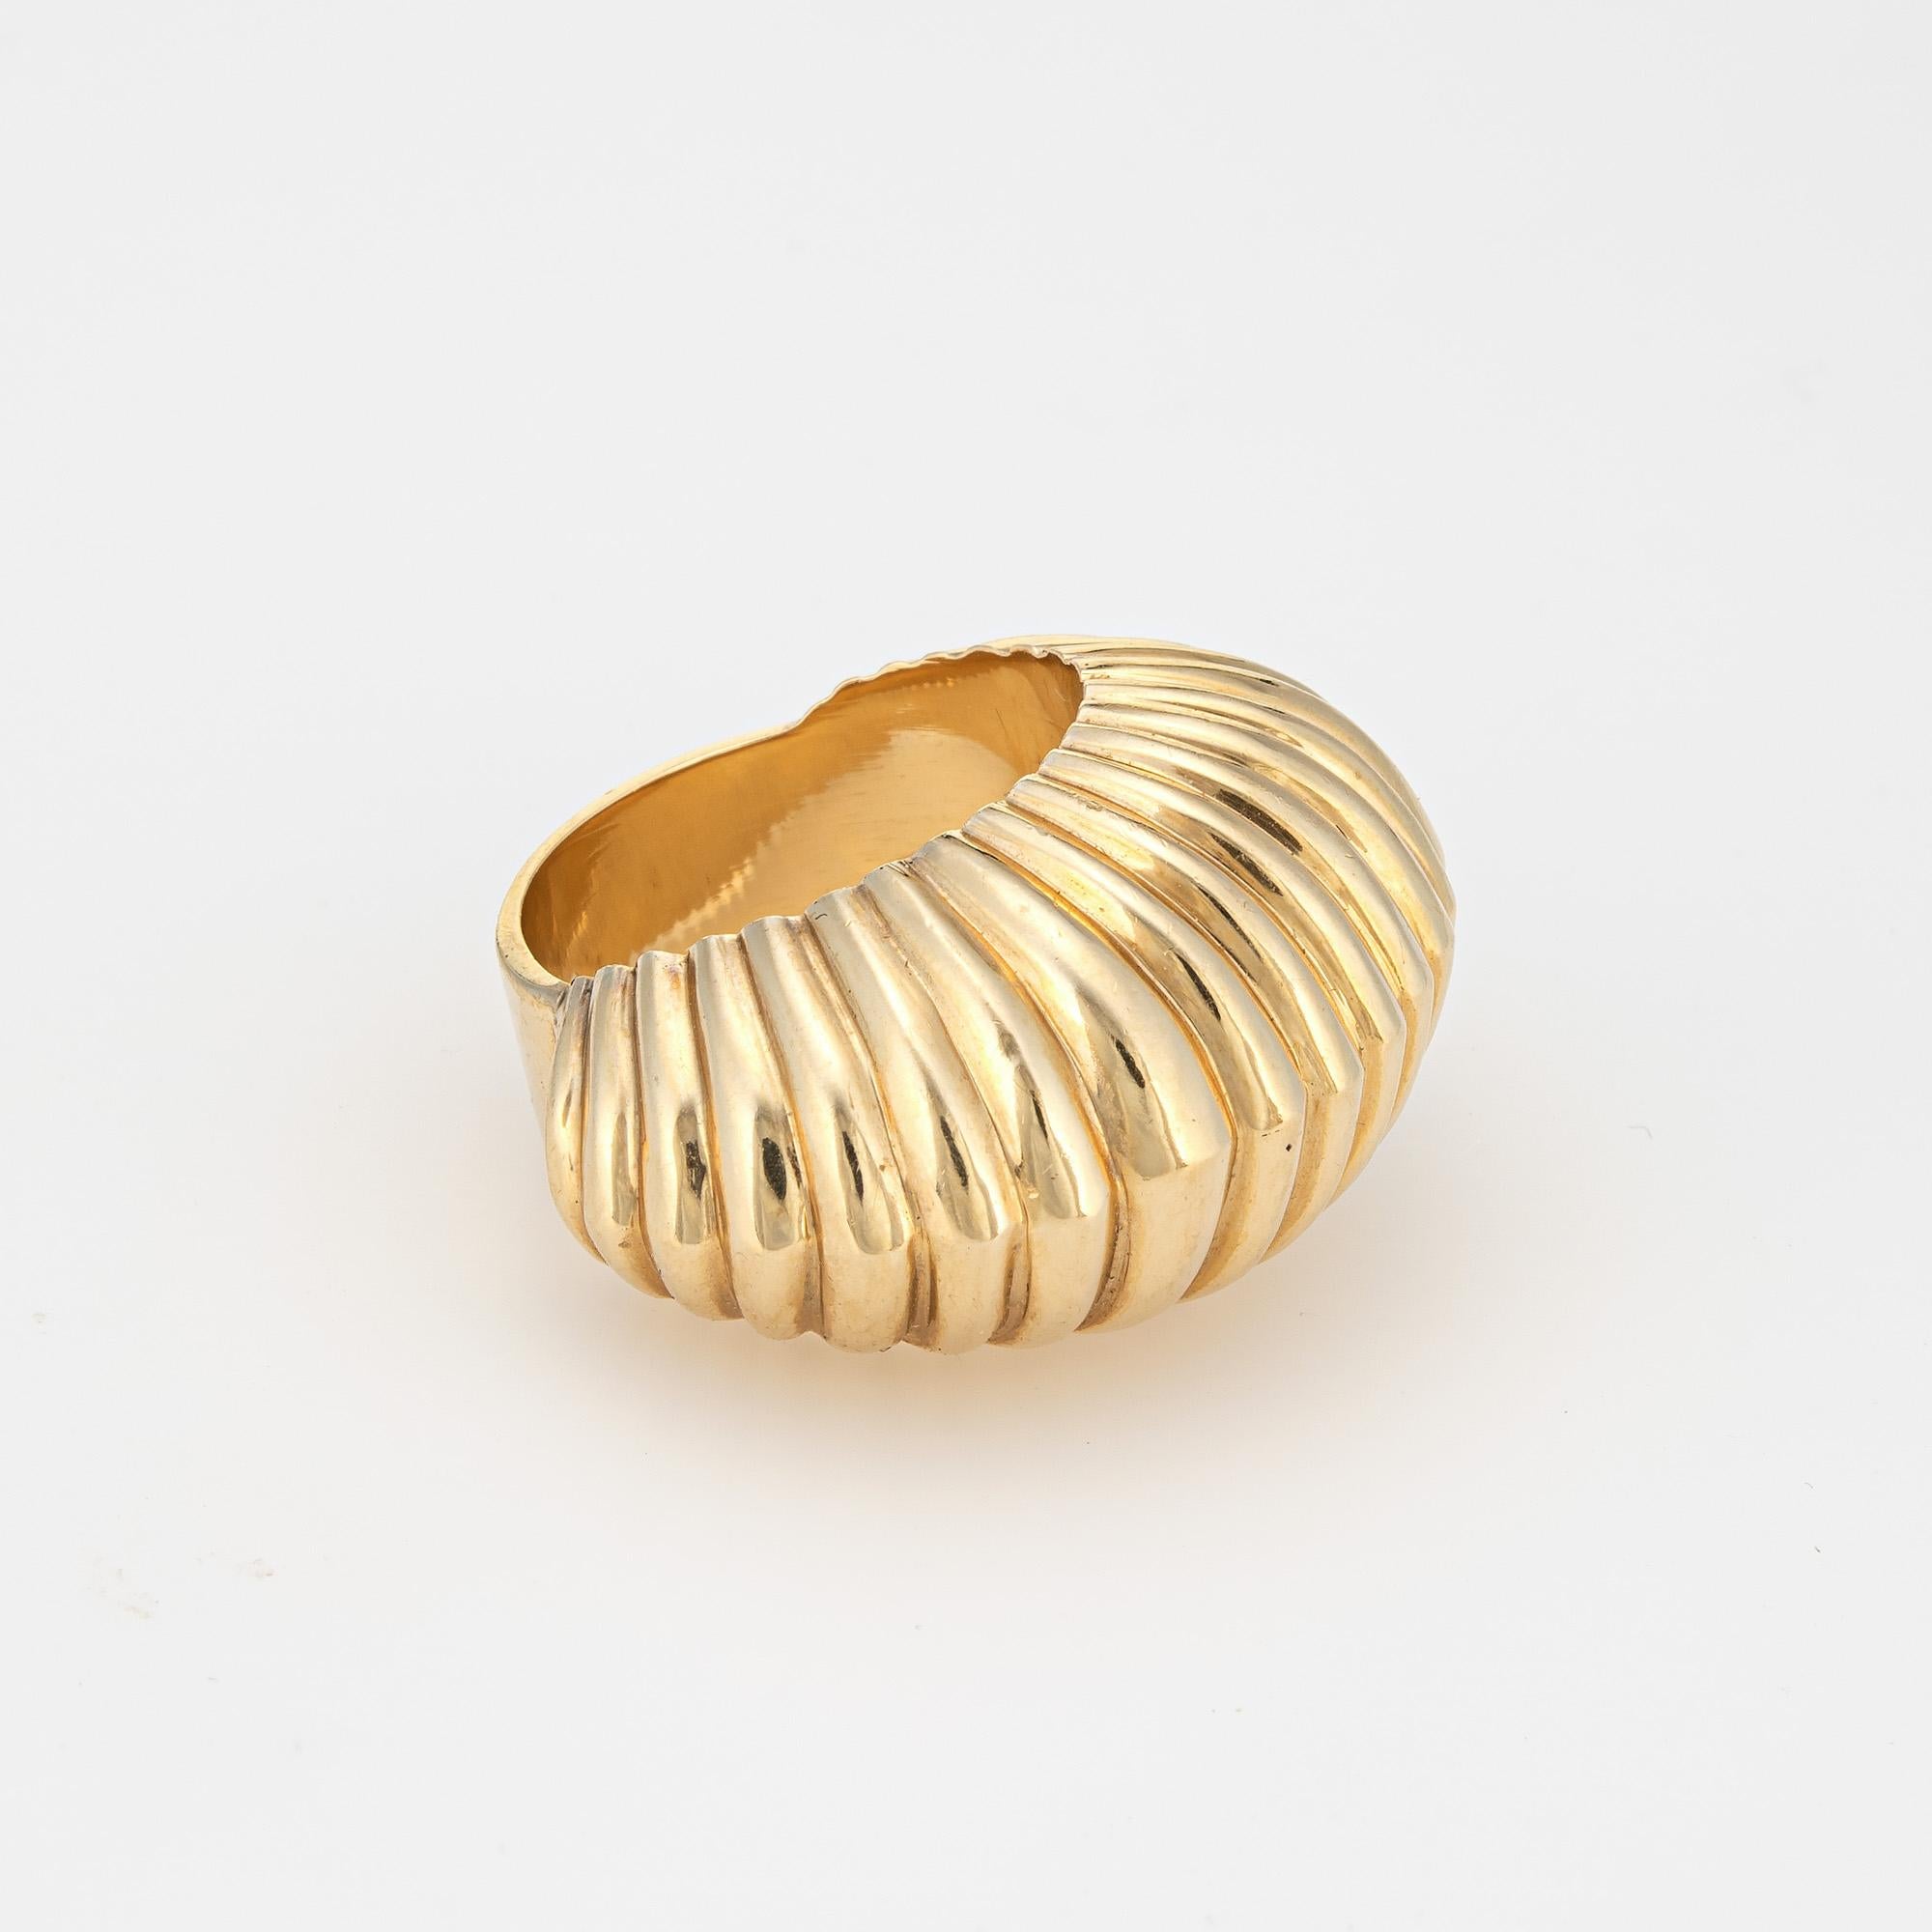 Retro Vintage Cartier Ring c1945 Bombe Fluted Dome 14k Gold Sz 5.75 Shell Jewelry    For Sale